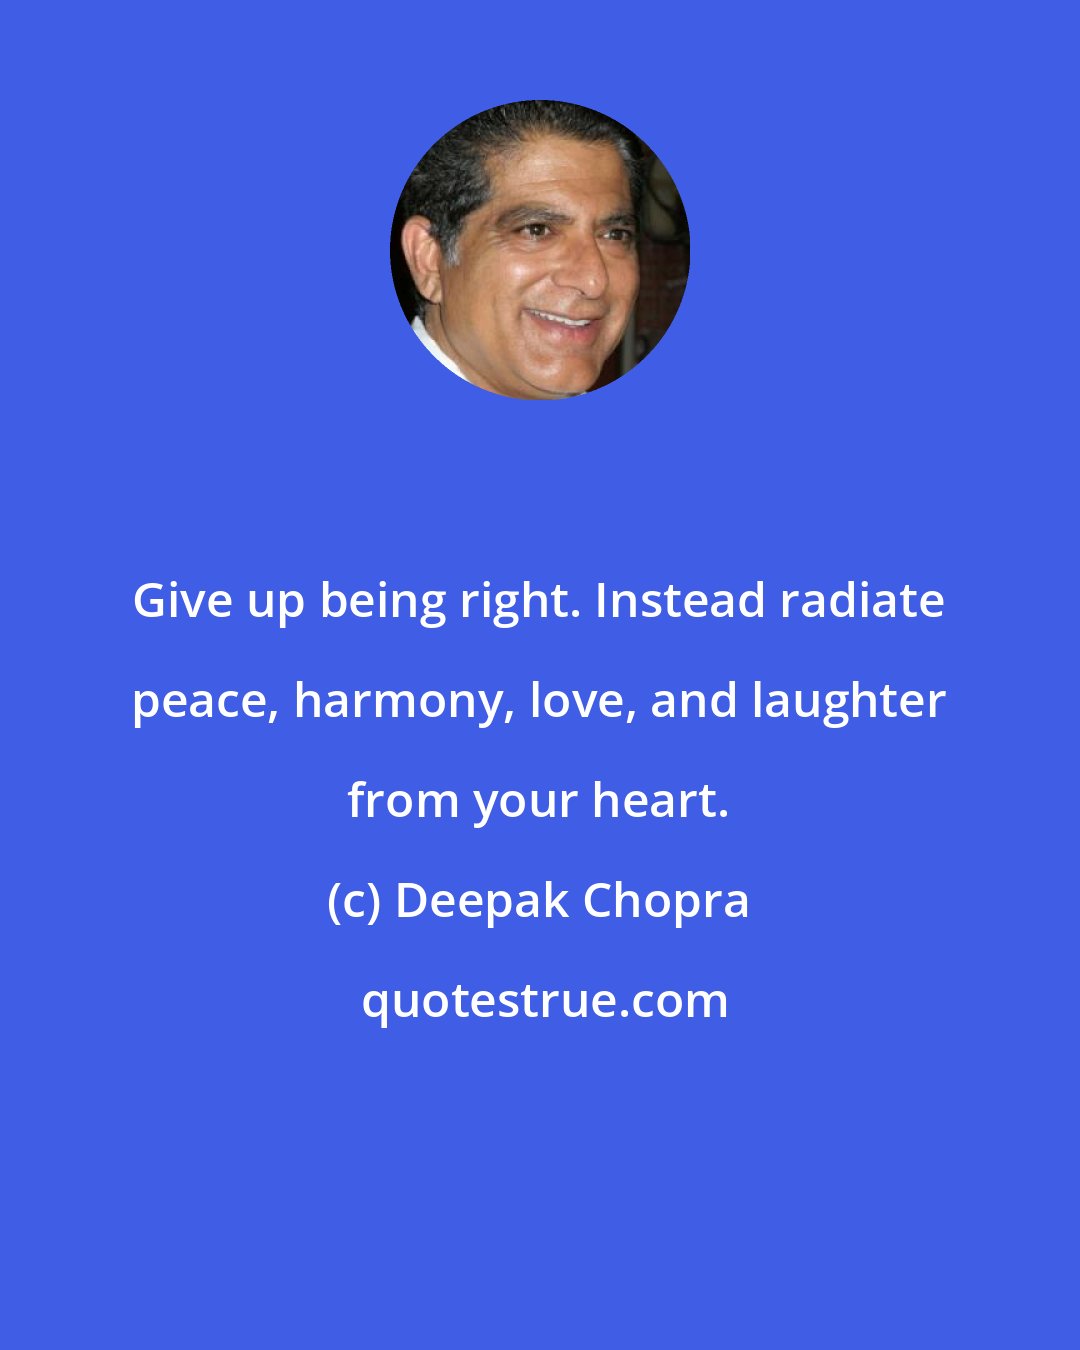 Deepak Chopra: Give up being right. Instead radiate peace, harmony, love, and laughter from your heart.